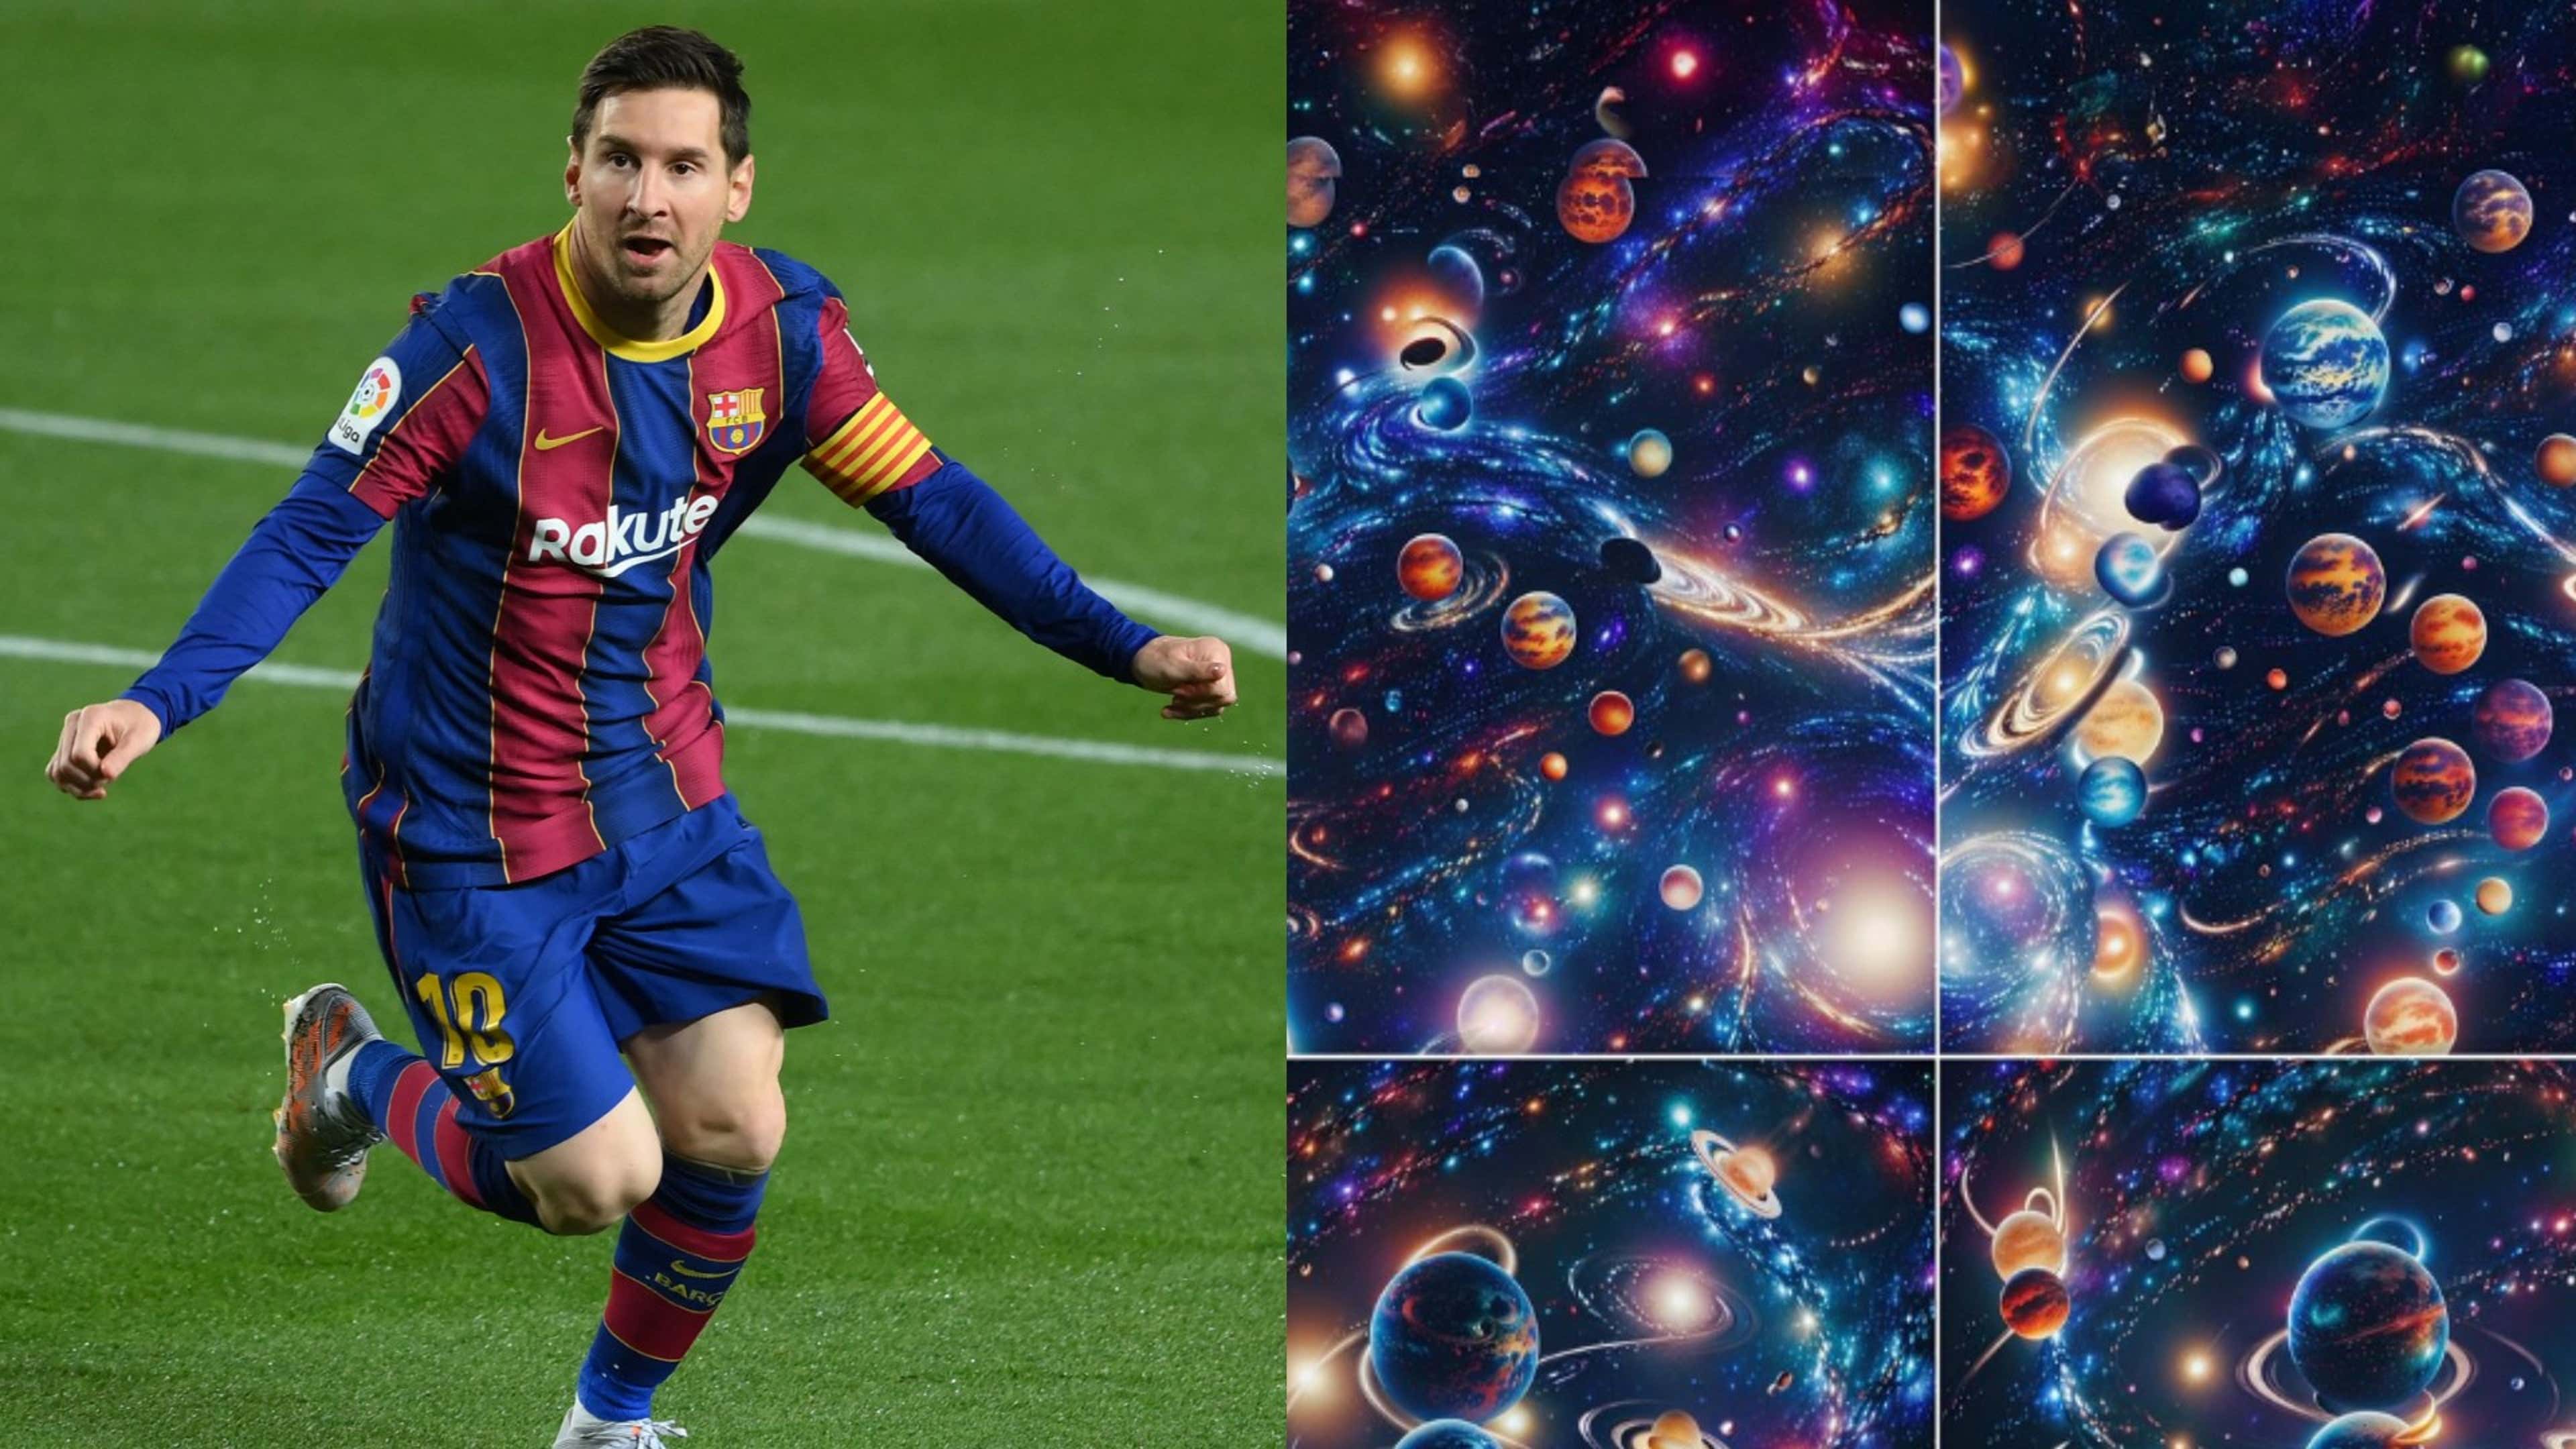 Are Barcelona teasing Lionel Messi's return?! Blaugrana send fans into  frenzy with strange AI images of Argentine superstar's iconic celebrations